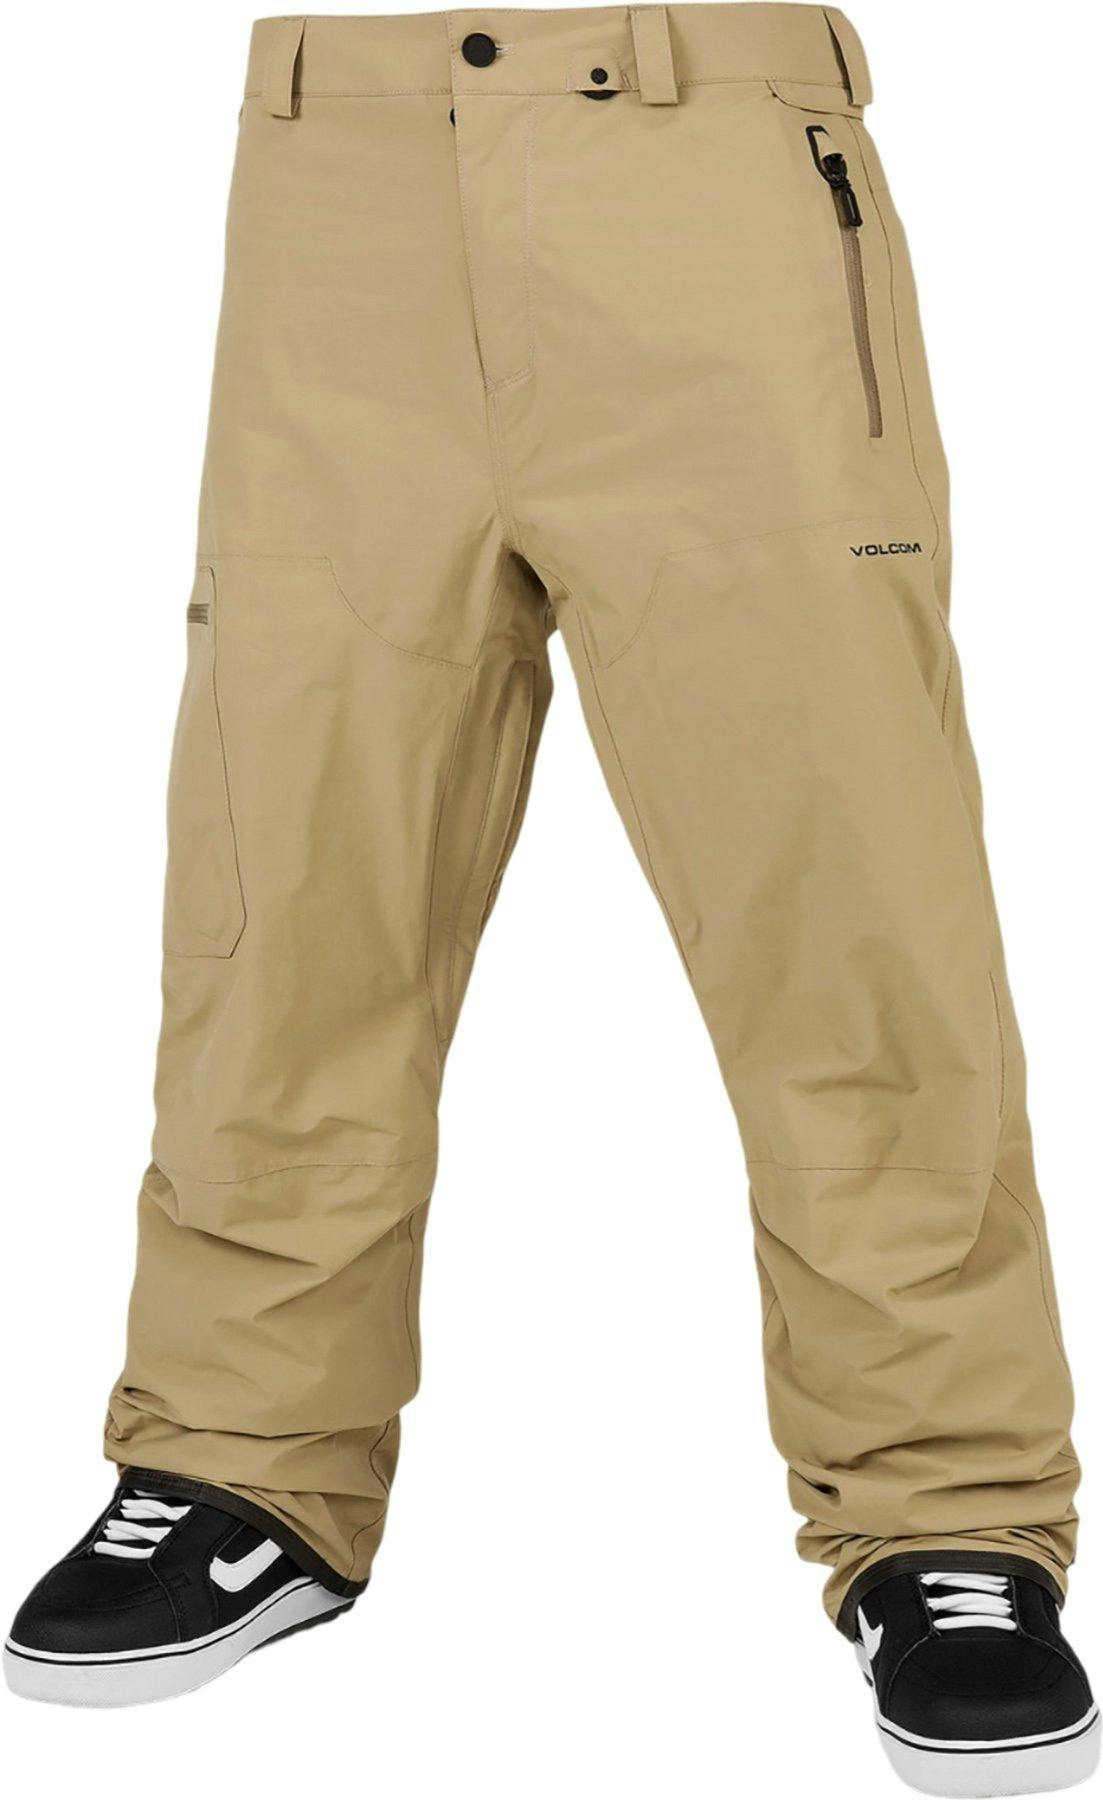 Product image for L GORE-TEX Trousers - Men's